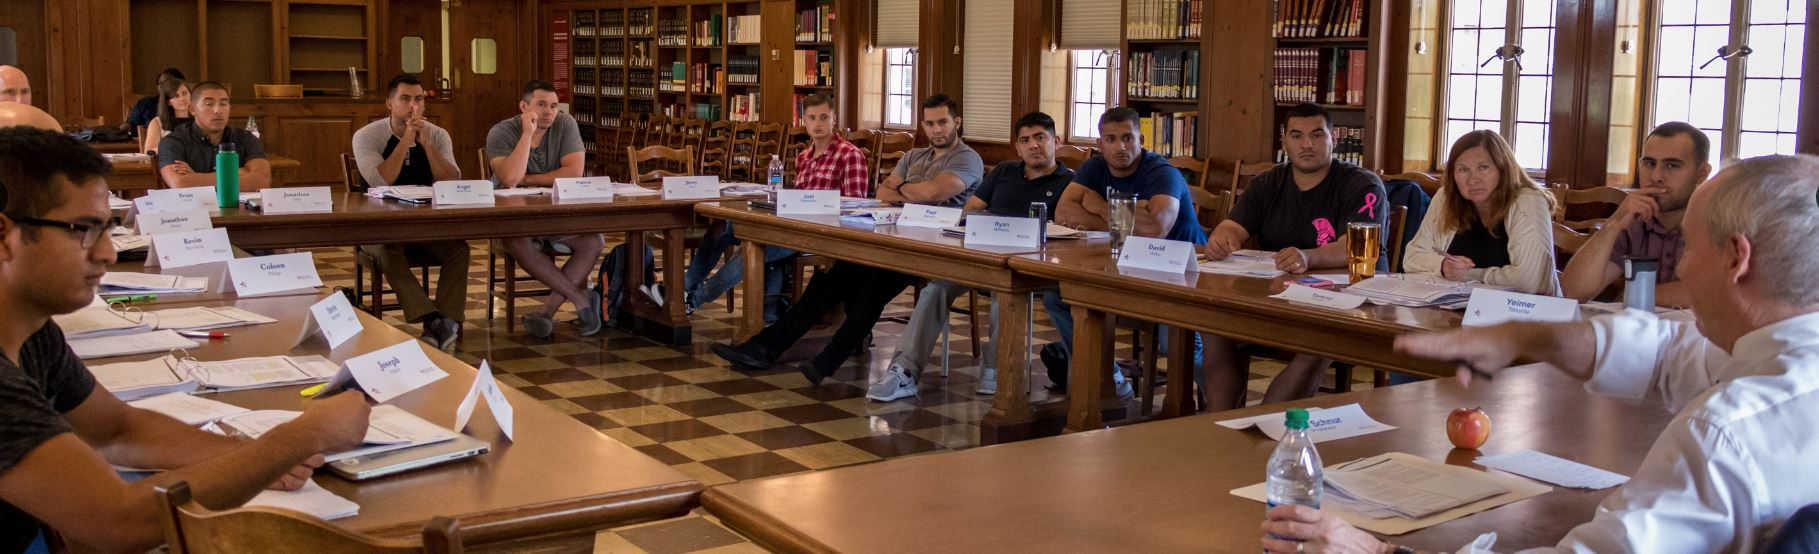 The Warrior-Scholar project gives veterans the opportunity to study texts and ideas that are foundational to democracy.  Here, veterans discuss the Declaration of Independence. Image courtesy of the Warrior-Scholar Project.